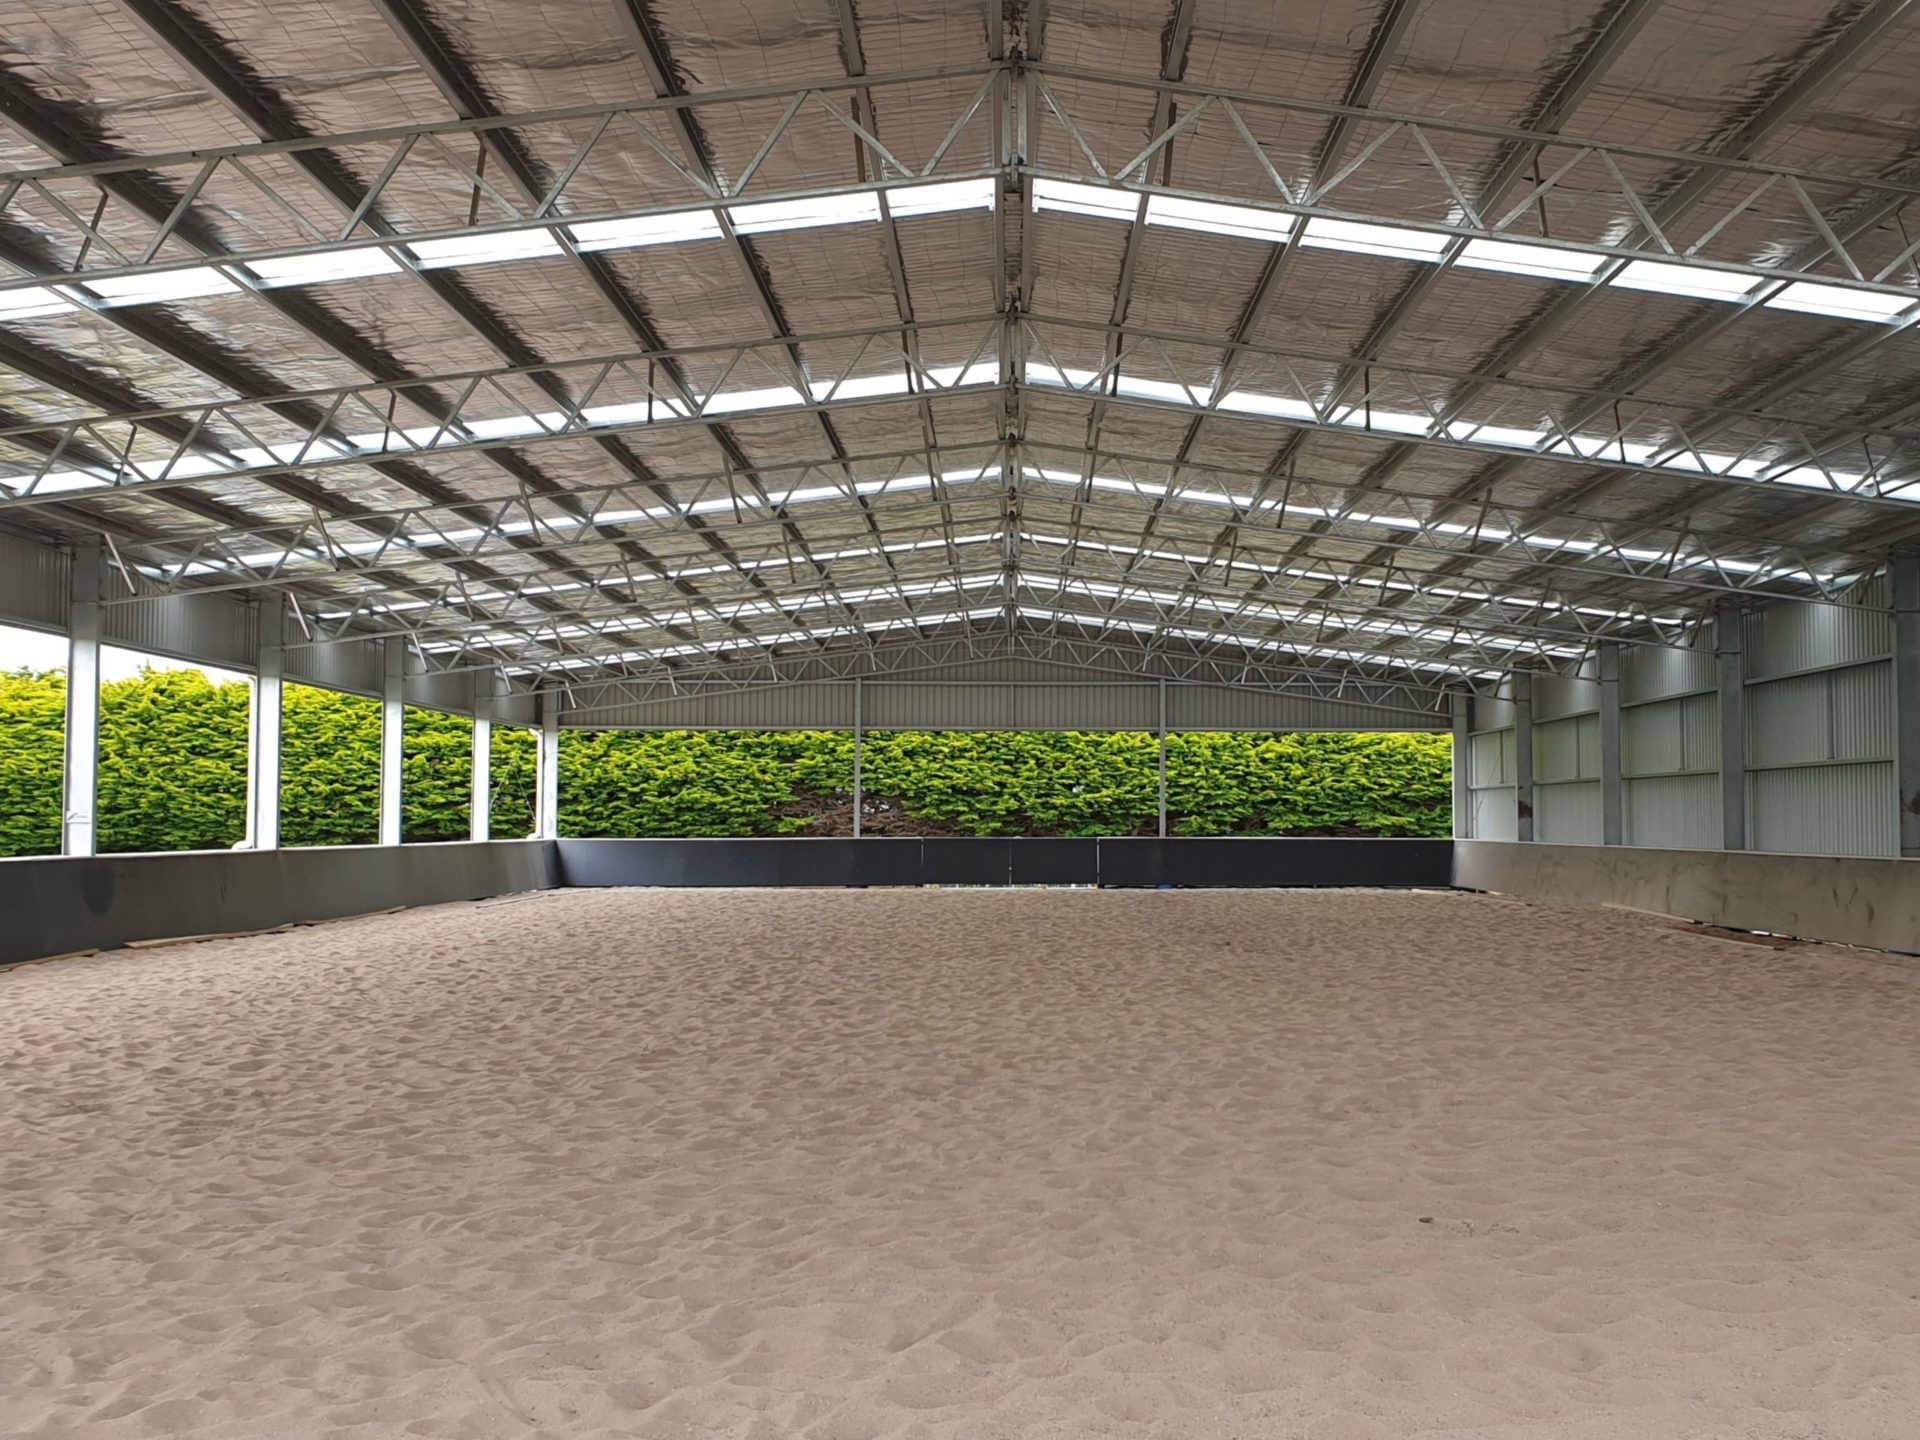 You are currently viewing 60m x 24m x 5.25m horse arena cover